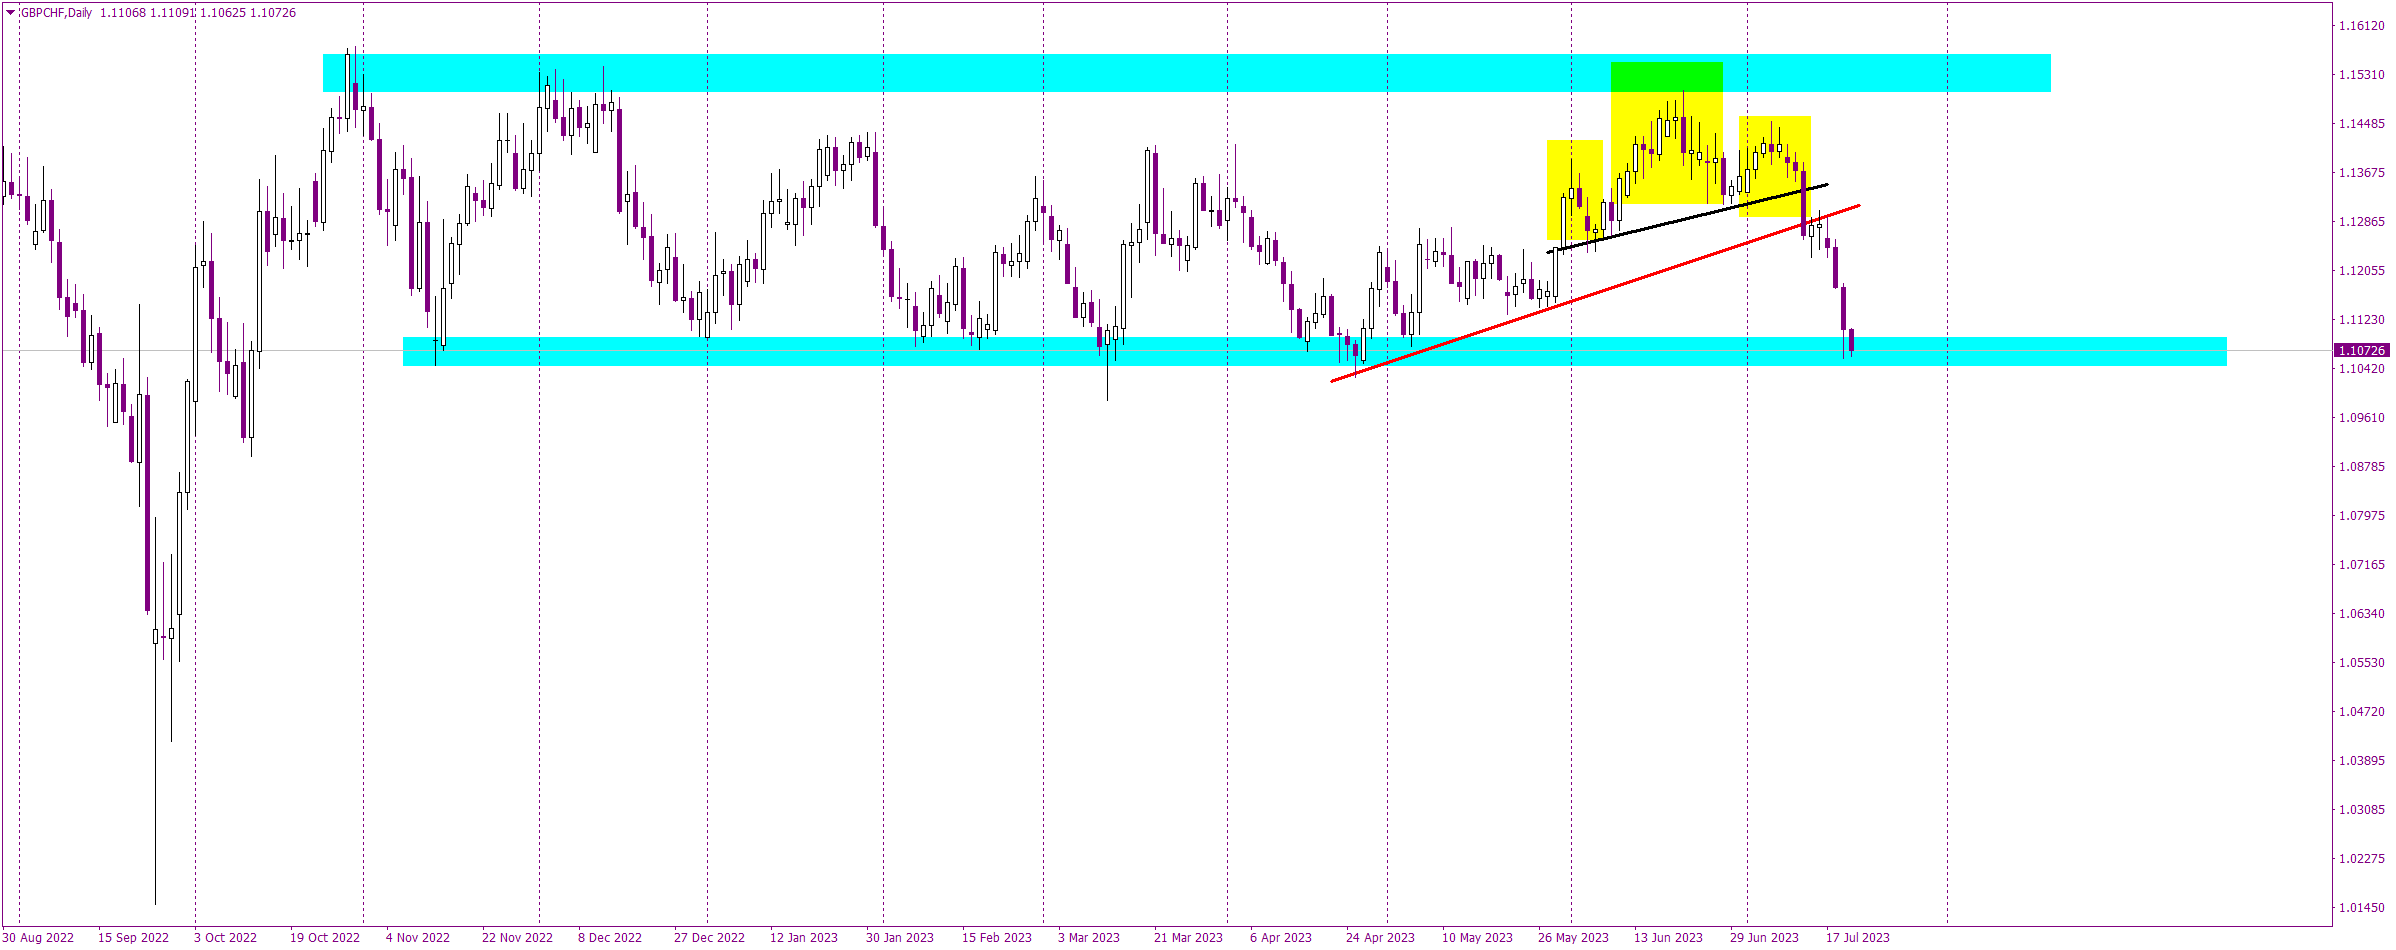 GBPCHF Update: Exploring the Probability of a Bearish Breakout in the Sideways Trend